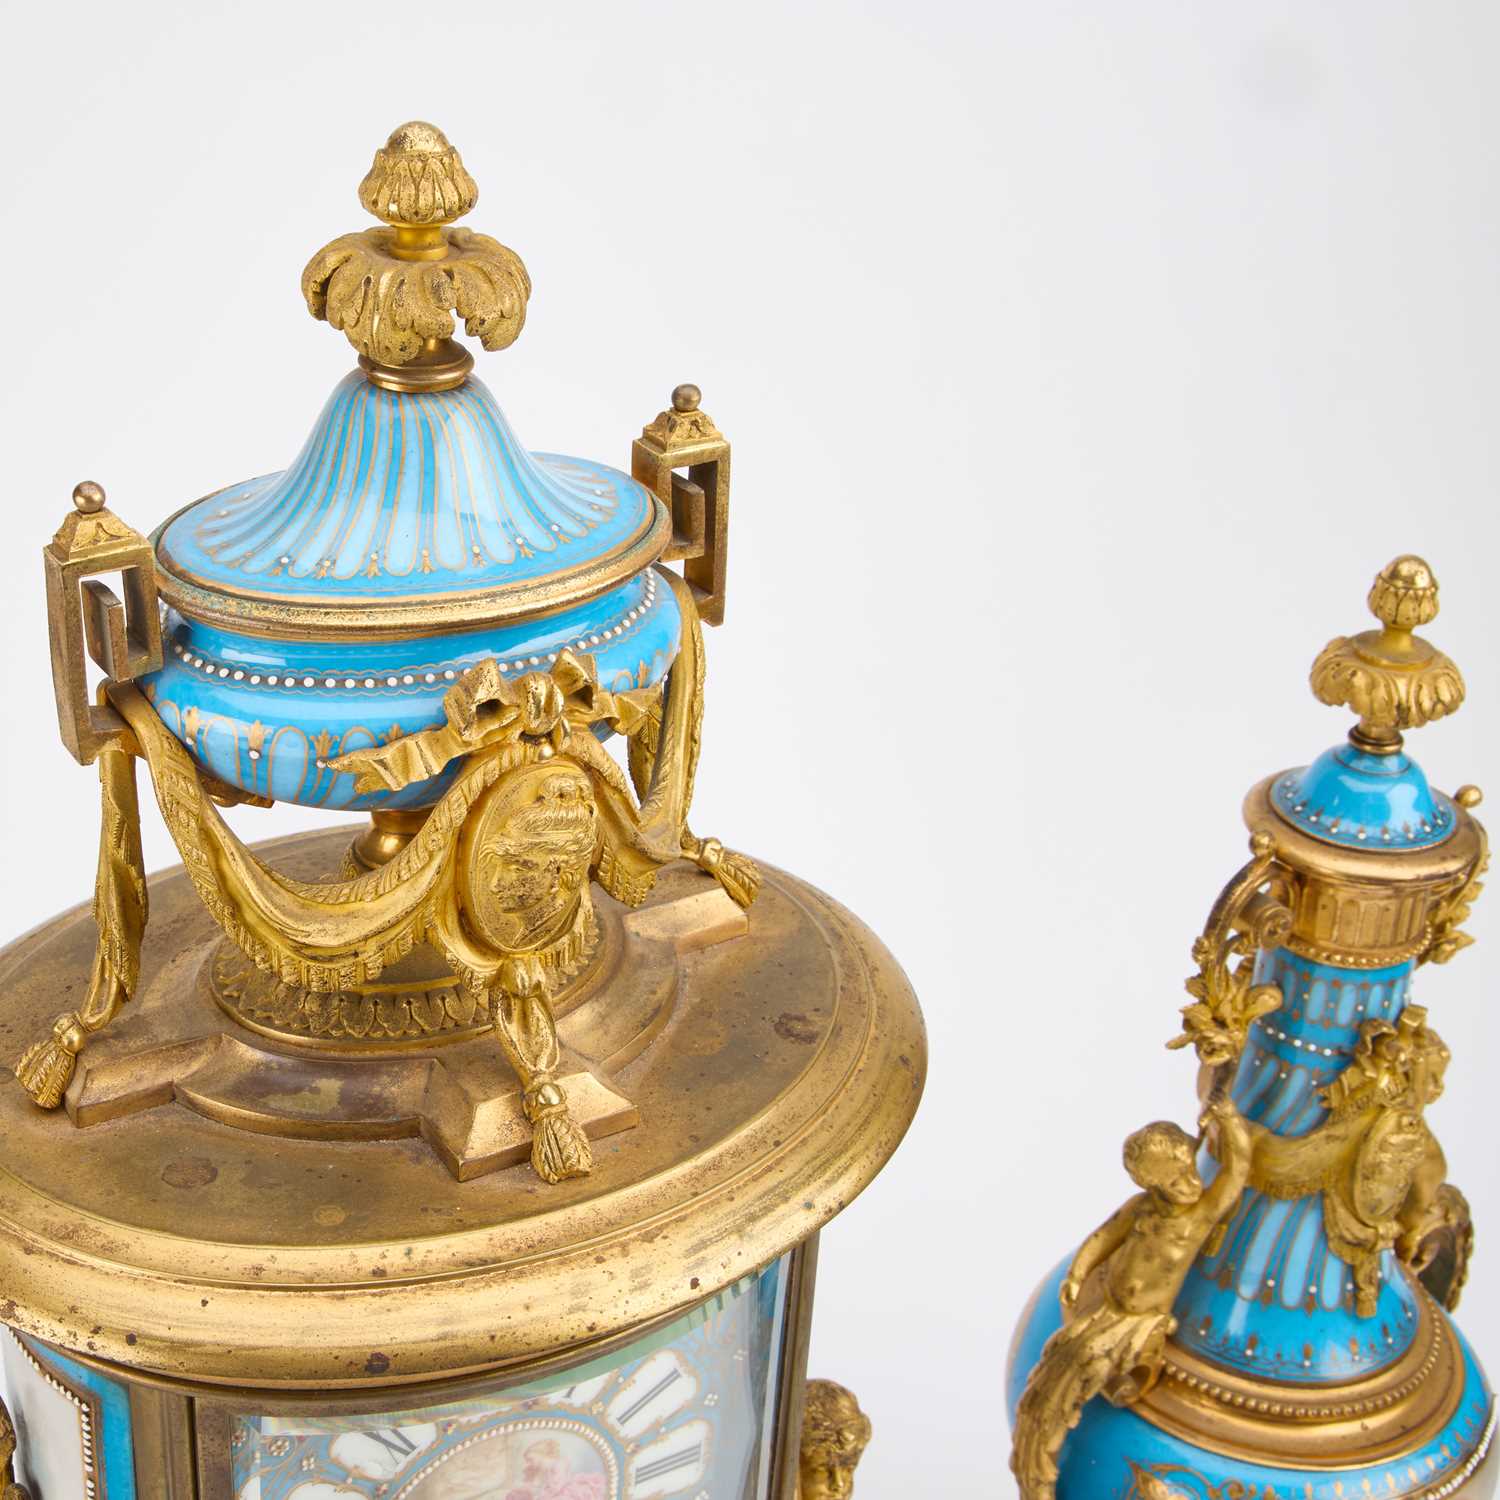 A FINE 19TH CENTURY FRENCH ORMOLU-MOUNTED 'SÈVRES' PORCELAIN CLOCK GARNITURE - Image 5 of 5